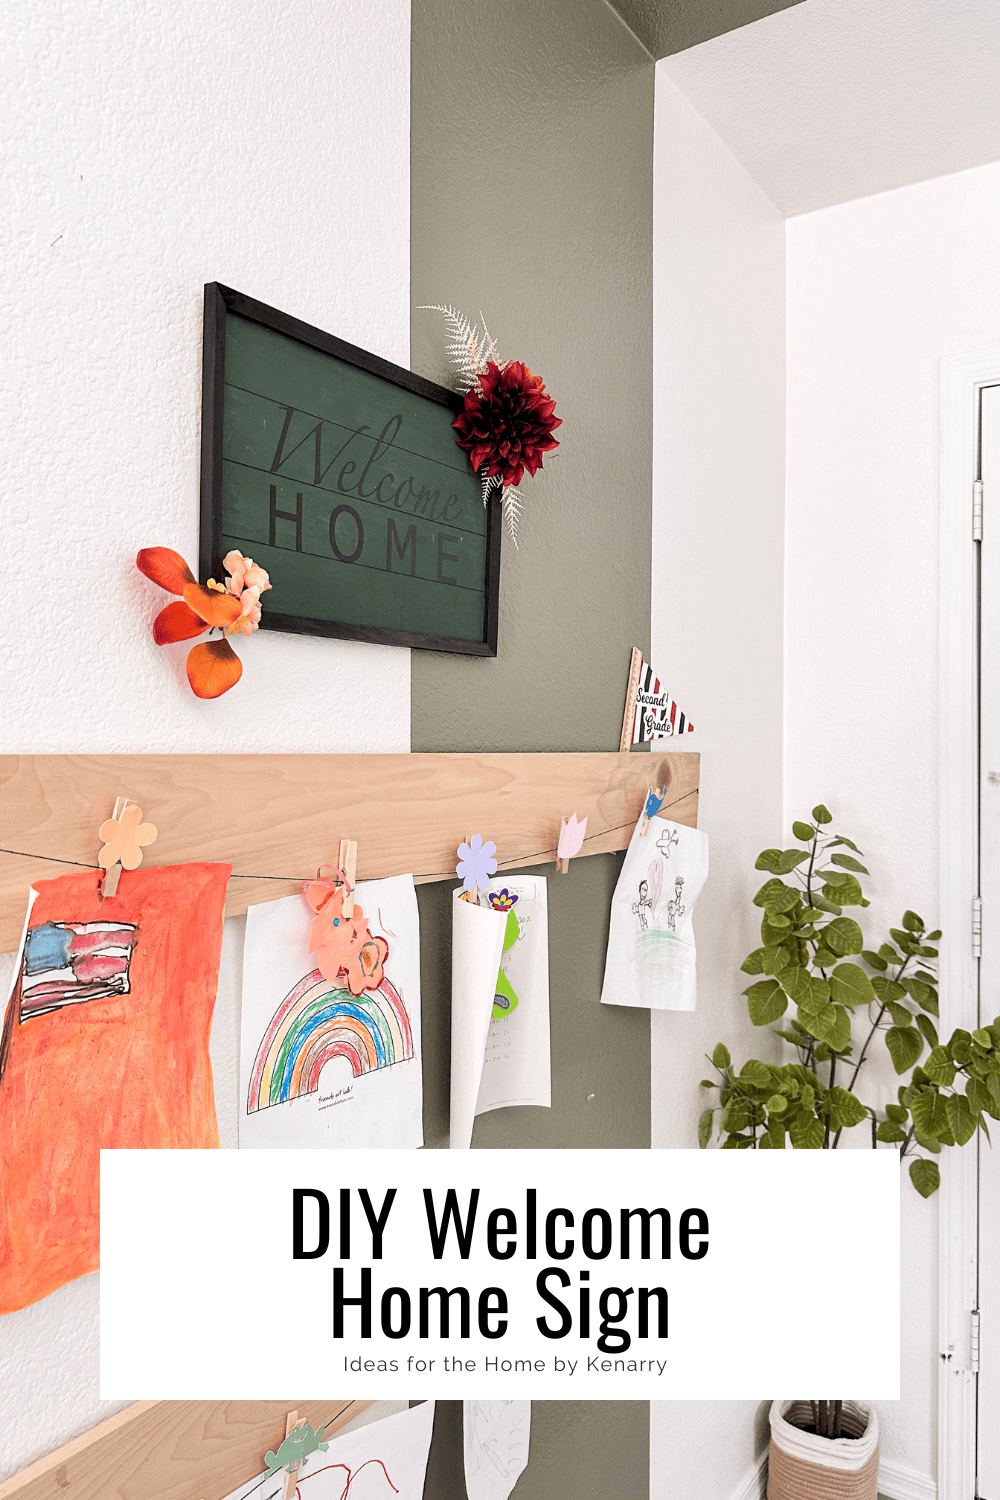 Green sign with a black frame that says Welcome Home with burgundy and burnt orange flowers hanging on a white and green wall with artwork hanging below it